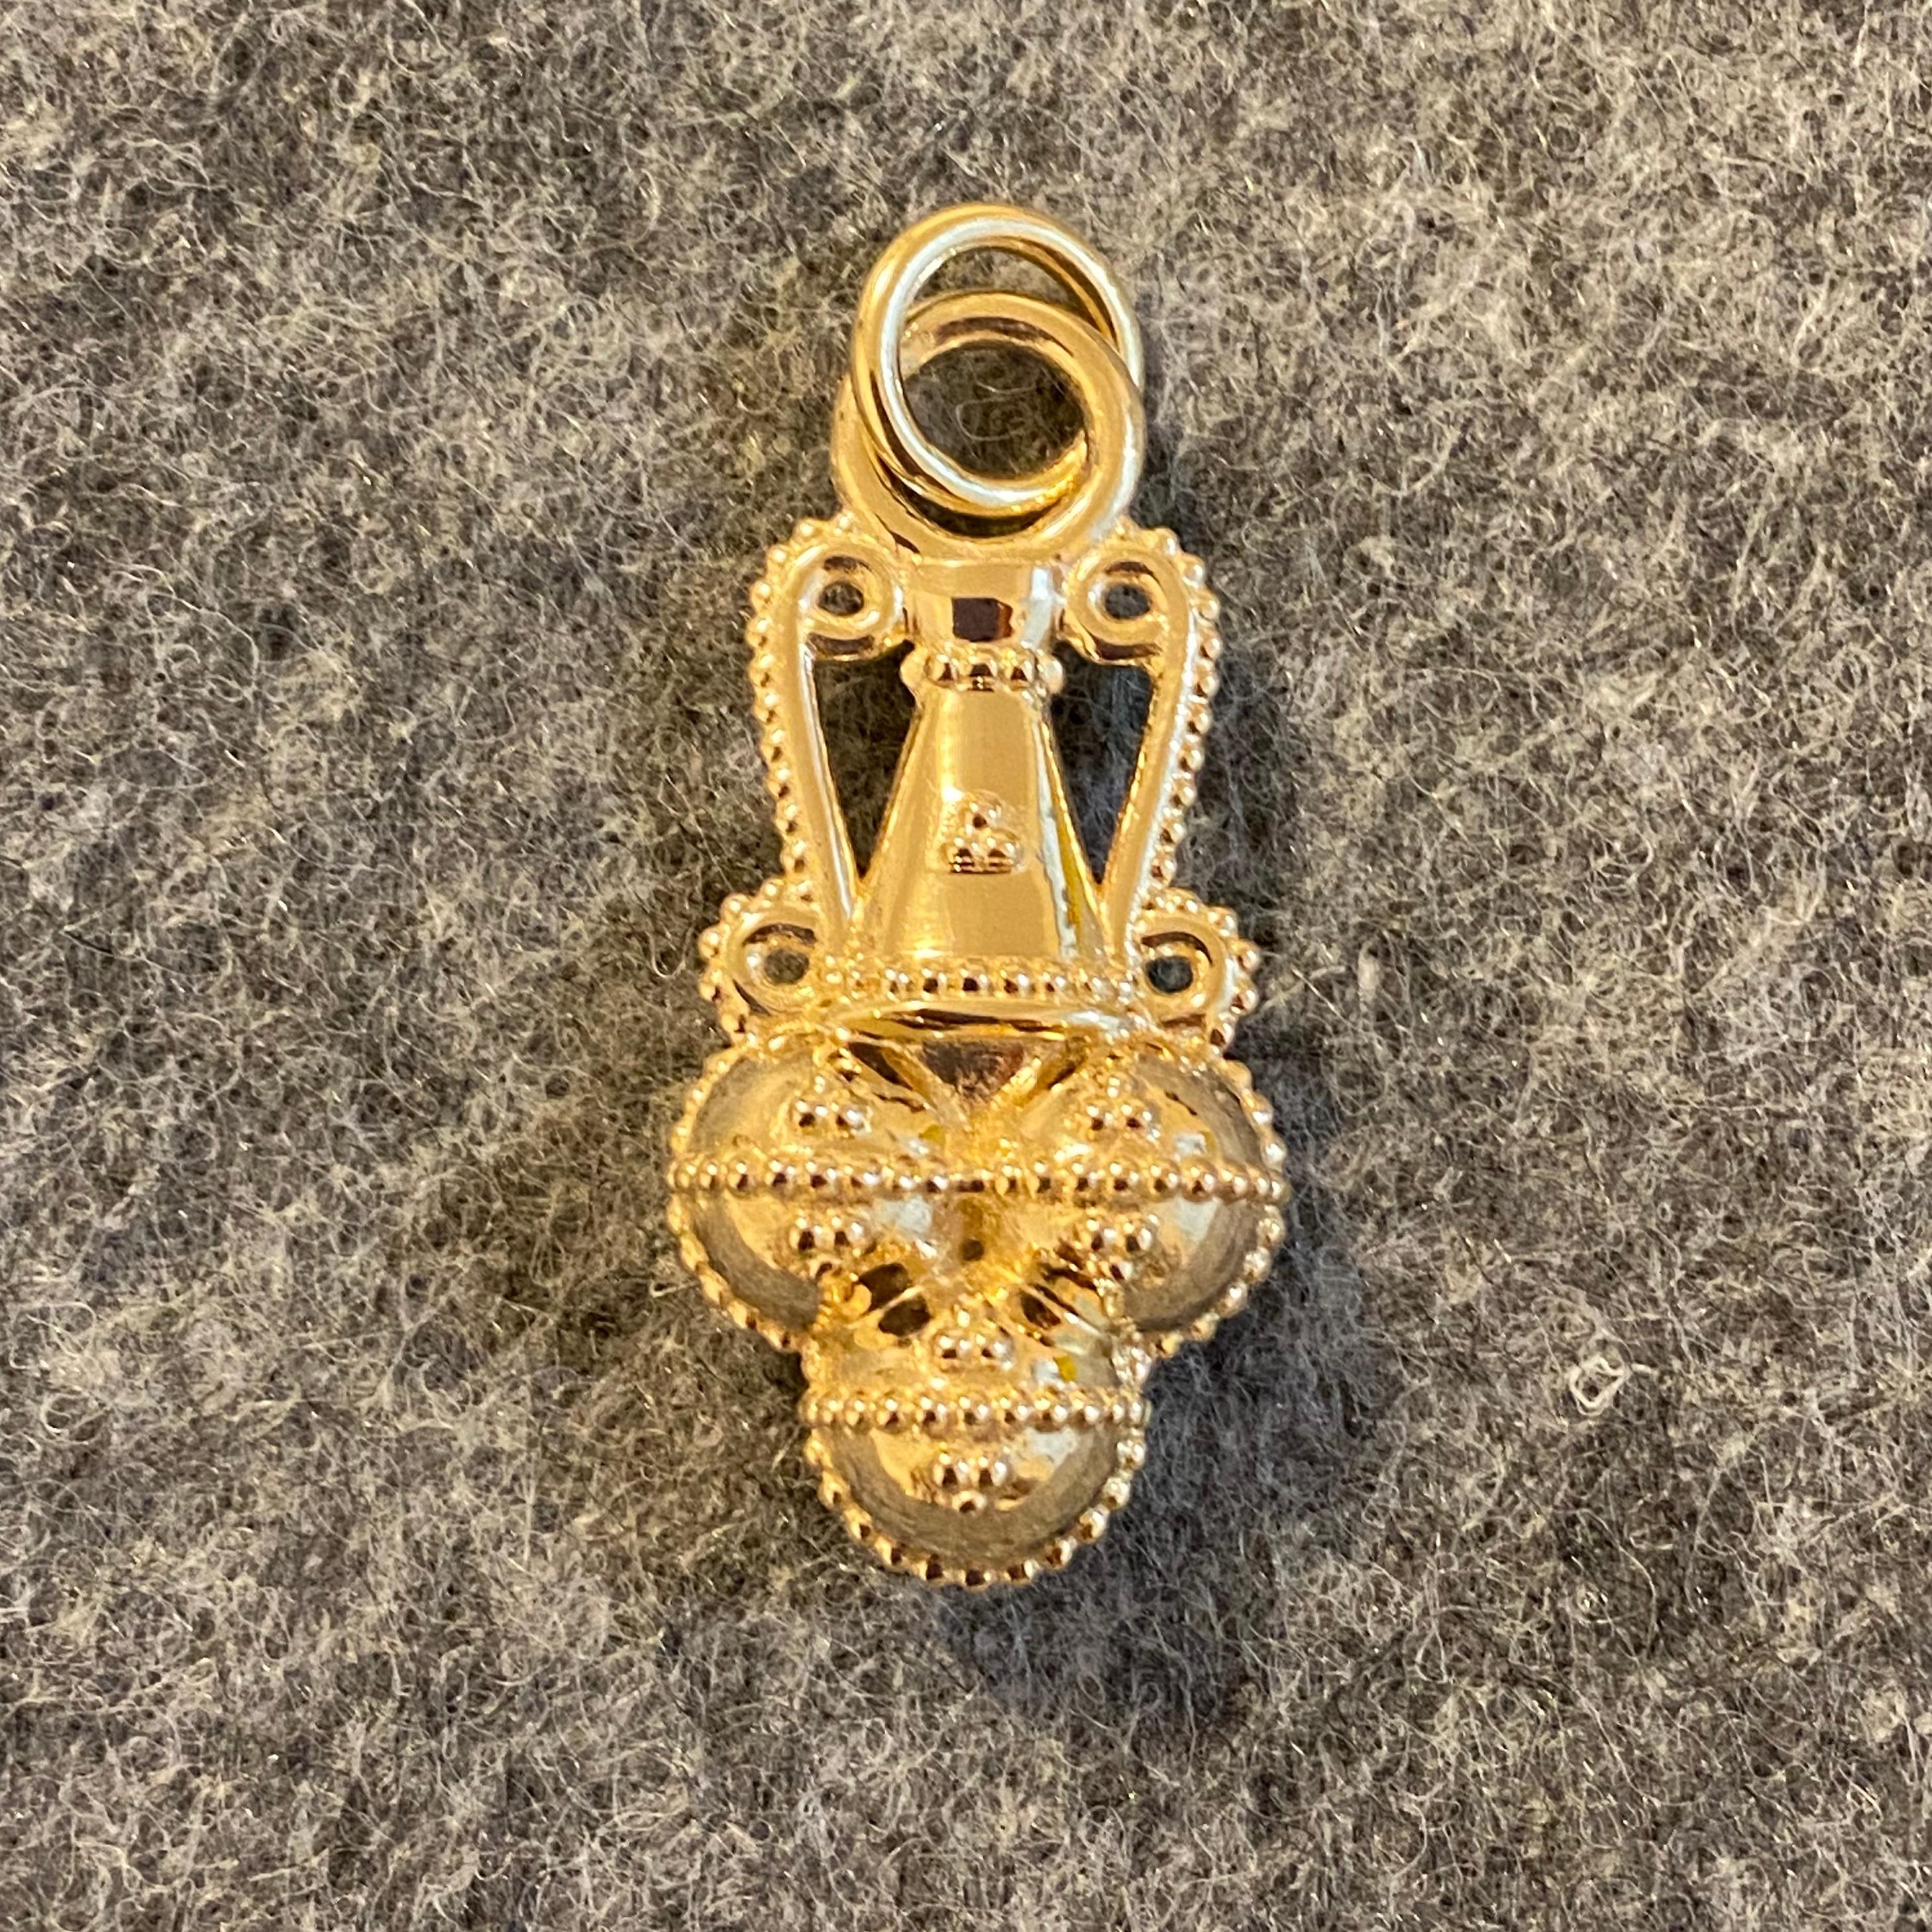 22 Karat Yellow Gold Amphora Pendant by ROMAE Jewelry - Inspired by Ancient Designs. Our distinctive Parthia pendant recalls the shape of an ancient amphora or storage and shipping container, complete with ornamental volute 